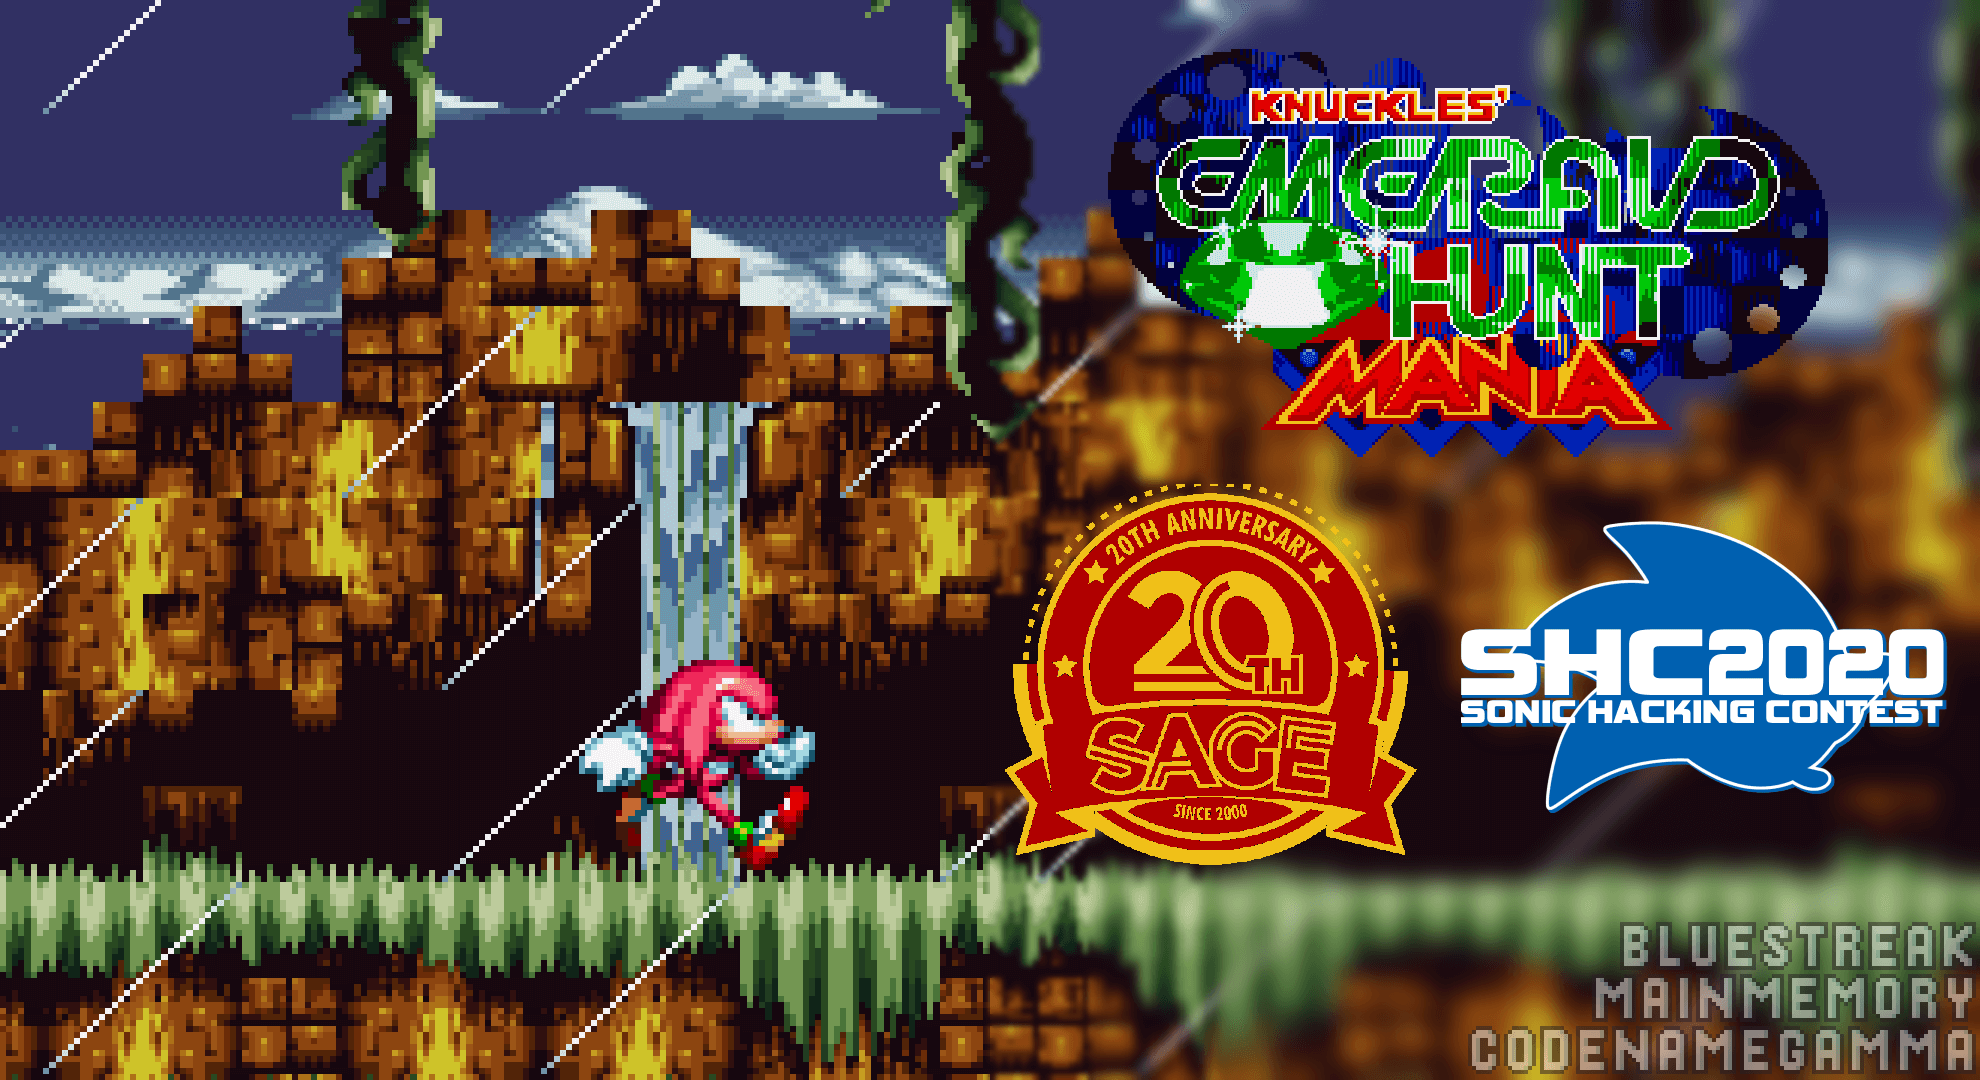 The Emerald Collection [Sonic Mania] [Mods]